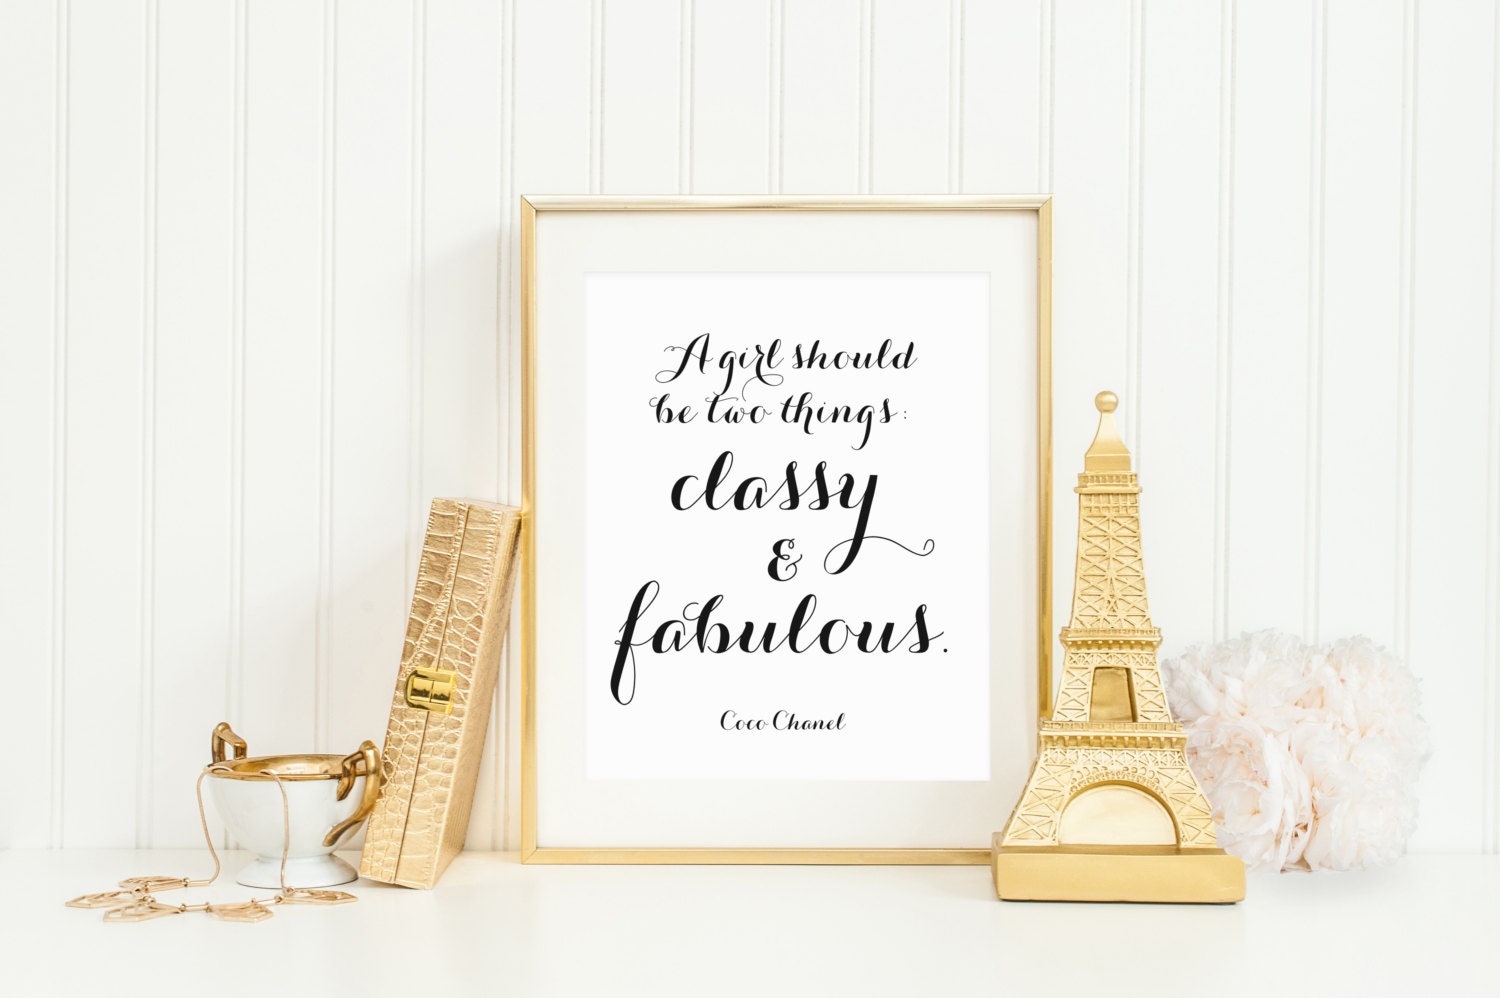 Inspirational Coco Chanel Quotes